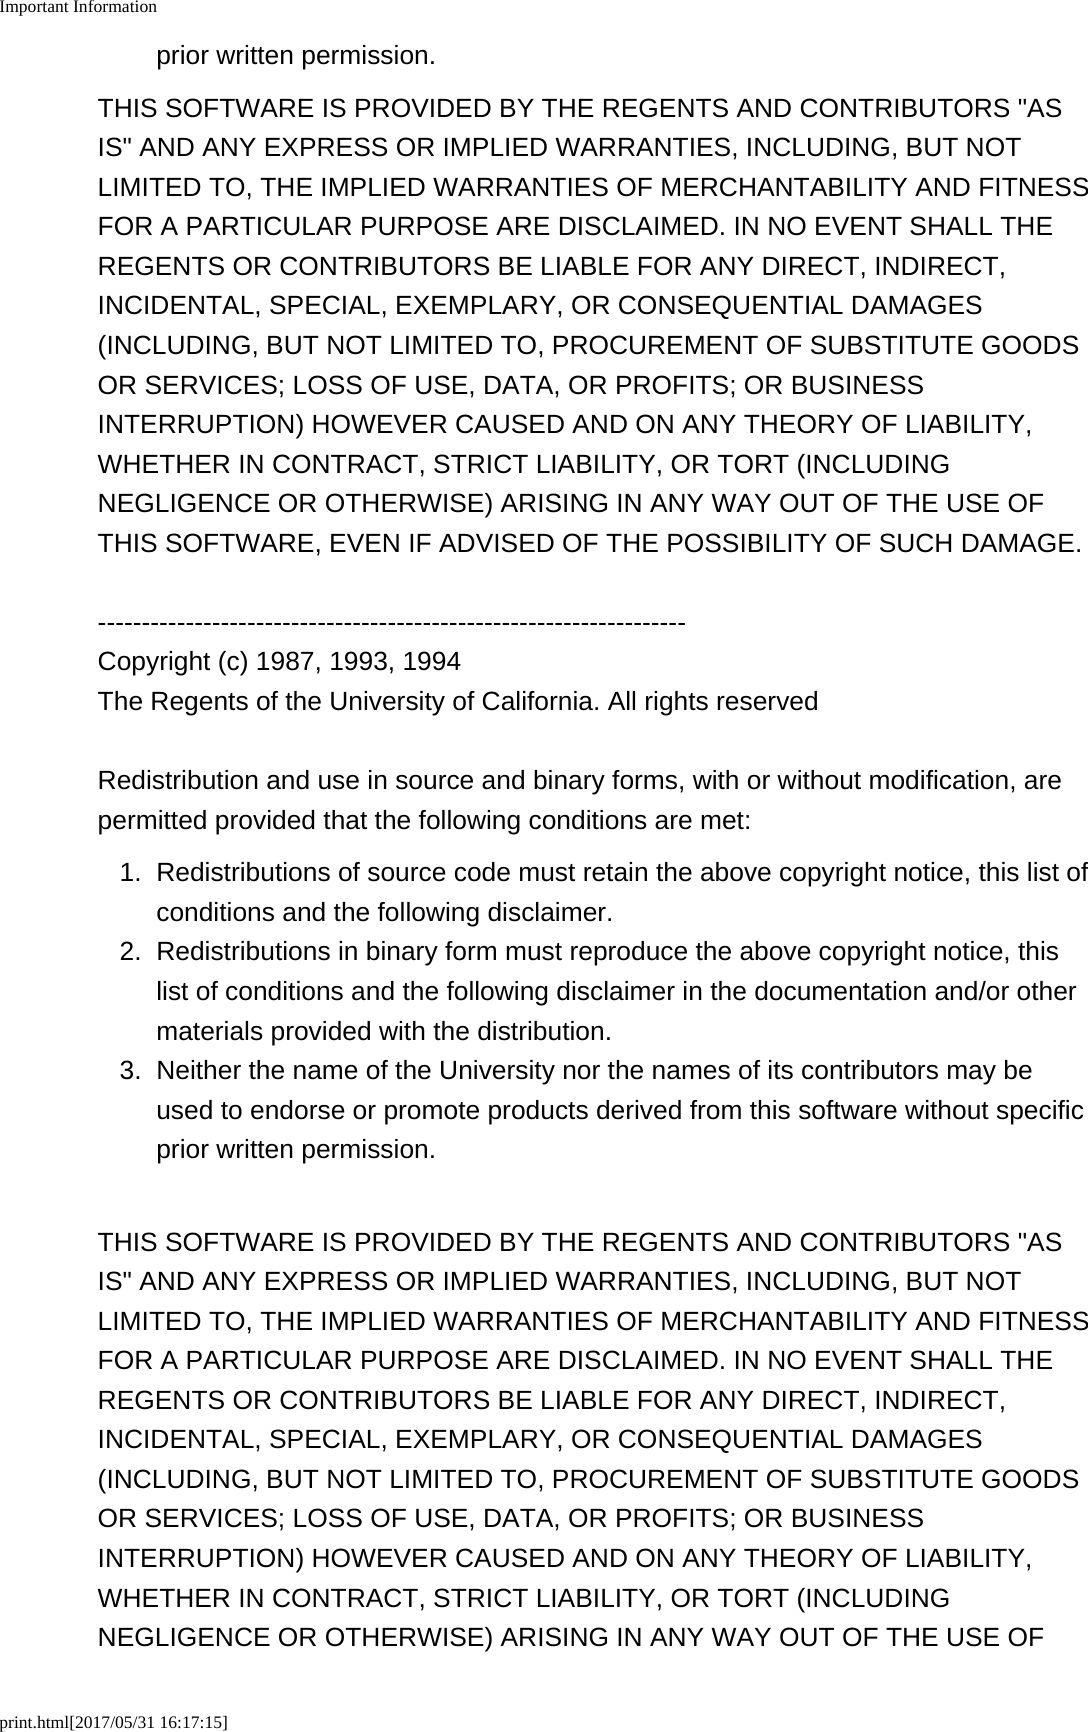 Important Informationprint.html[2017/05/31 16:17:15]prior written permission.THIS SOFTWARE IS PROVIDED BY THE REGENTS AND CONTRIBUTORS &quot;ASIS&quot; AND ANY EXPRESS OR IMPLIED WARRANTIES, INCLUDING, BUT NOTLIMITED TO, THE IMPLIED WARRANTIES OF MERCHANTABILITY AND FITNESSFOR A PARTICULAR PURPOSE ARE DISCLAIMED. IN NO EVENT SHALL THEREGENTS OR CONTRIBUTORS BE LIABLE FOR ANY DIRECT, INDIRECT,INCIDENTAL, SPECIAL, EXEMPLARY, OR CONSEQUENTIAL DAMAGES(INCLUDING, BUT NOT LIMITED TO, PROCUREMENT OF SUBSTITUTE GOODSOR SERVICES; LOSS OF USE, DATA, OR PROFITS; OR BUSINESSINTERRUPTION) HOWEVER CAUSED AND ON ANY THEORY OF LIABILITY,WHETHER IN CONTRACT, STRICT LIABILITY, OR TORT (INCLUDINGNEGLIGENCE OR OTHERWISE) ARISING IN ANY WAY OUT OF THE USE OFTHIS SOFTWARE, EVEN IF ADVISED OF THE POSSIBILITY OF SUCH DAMAGE.-------------------------------------------------------------------Copyright (c) 1987, 1993, 1994The Regents of the University of California. All rights reservedRedistribution and use in source and binary forms, with or without modification, arepermitted provided that the following conditions are met:1. Redistributions of source code must retain the above copyright notice, this list ofconditions and the following disclaimer.2. Redistributions in binary form must reproduce the above copyright notice, thislist of conditions and the following disclaimer in the documentation and/or othermaterials provided with the distribution.3.Neither the name of the University nor the names of its contributors may beused to endorse or promote products derived from this software without specificprior written permission.THIS SOFTWARE IS PROVIDED BY THE REGENTS AND CONTRIBUTORS &quot;ASIS&quot; AND ANY EXPRESS OR IMPLIED WARRANTIES, INCLUDING, BUT NOTLIMITED TO, THE IMPLIED WARRANTIES OF MERCHANTABILITY AND FITNESSFOR A PARTICULAR PURPOSE ARE DISCLAIMED. IN NO EVENT SHALL THEREGENTS OR CONTRIBUTORS BE LIABLE FOR ANY DIRECT, INDIRECT,INCIDENTAL, SPECIAL, EXEMPLARY, OR CONSEQUENTIAL DAMAGES(INCLUDING, BUT NOT LIMITED TO, PROCUREMENT OF SUBSTITUTE GOODSOR SERVICES; LOSS OF USE, DATA, OR PROFITS; OR BUSINESSINTERRUPTION) HOWEVER CAUSED AND ON ANY THEORY OF LIABILITY,WHETHER IN CONTRACT, STRICT LIABILITY, OR TORT (INCLUDINGNEGLIGENCE OR OTHERWISE) ARISING IN ANY WAY OUT OF THE USE OF